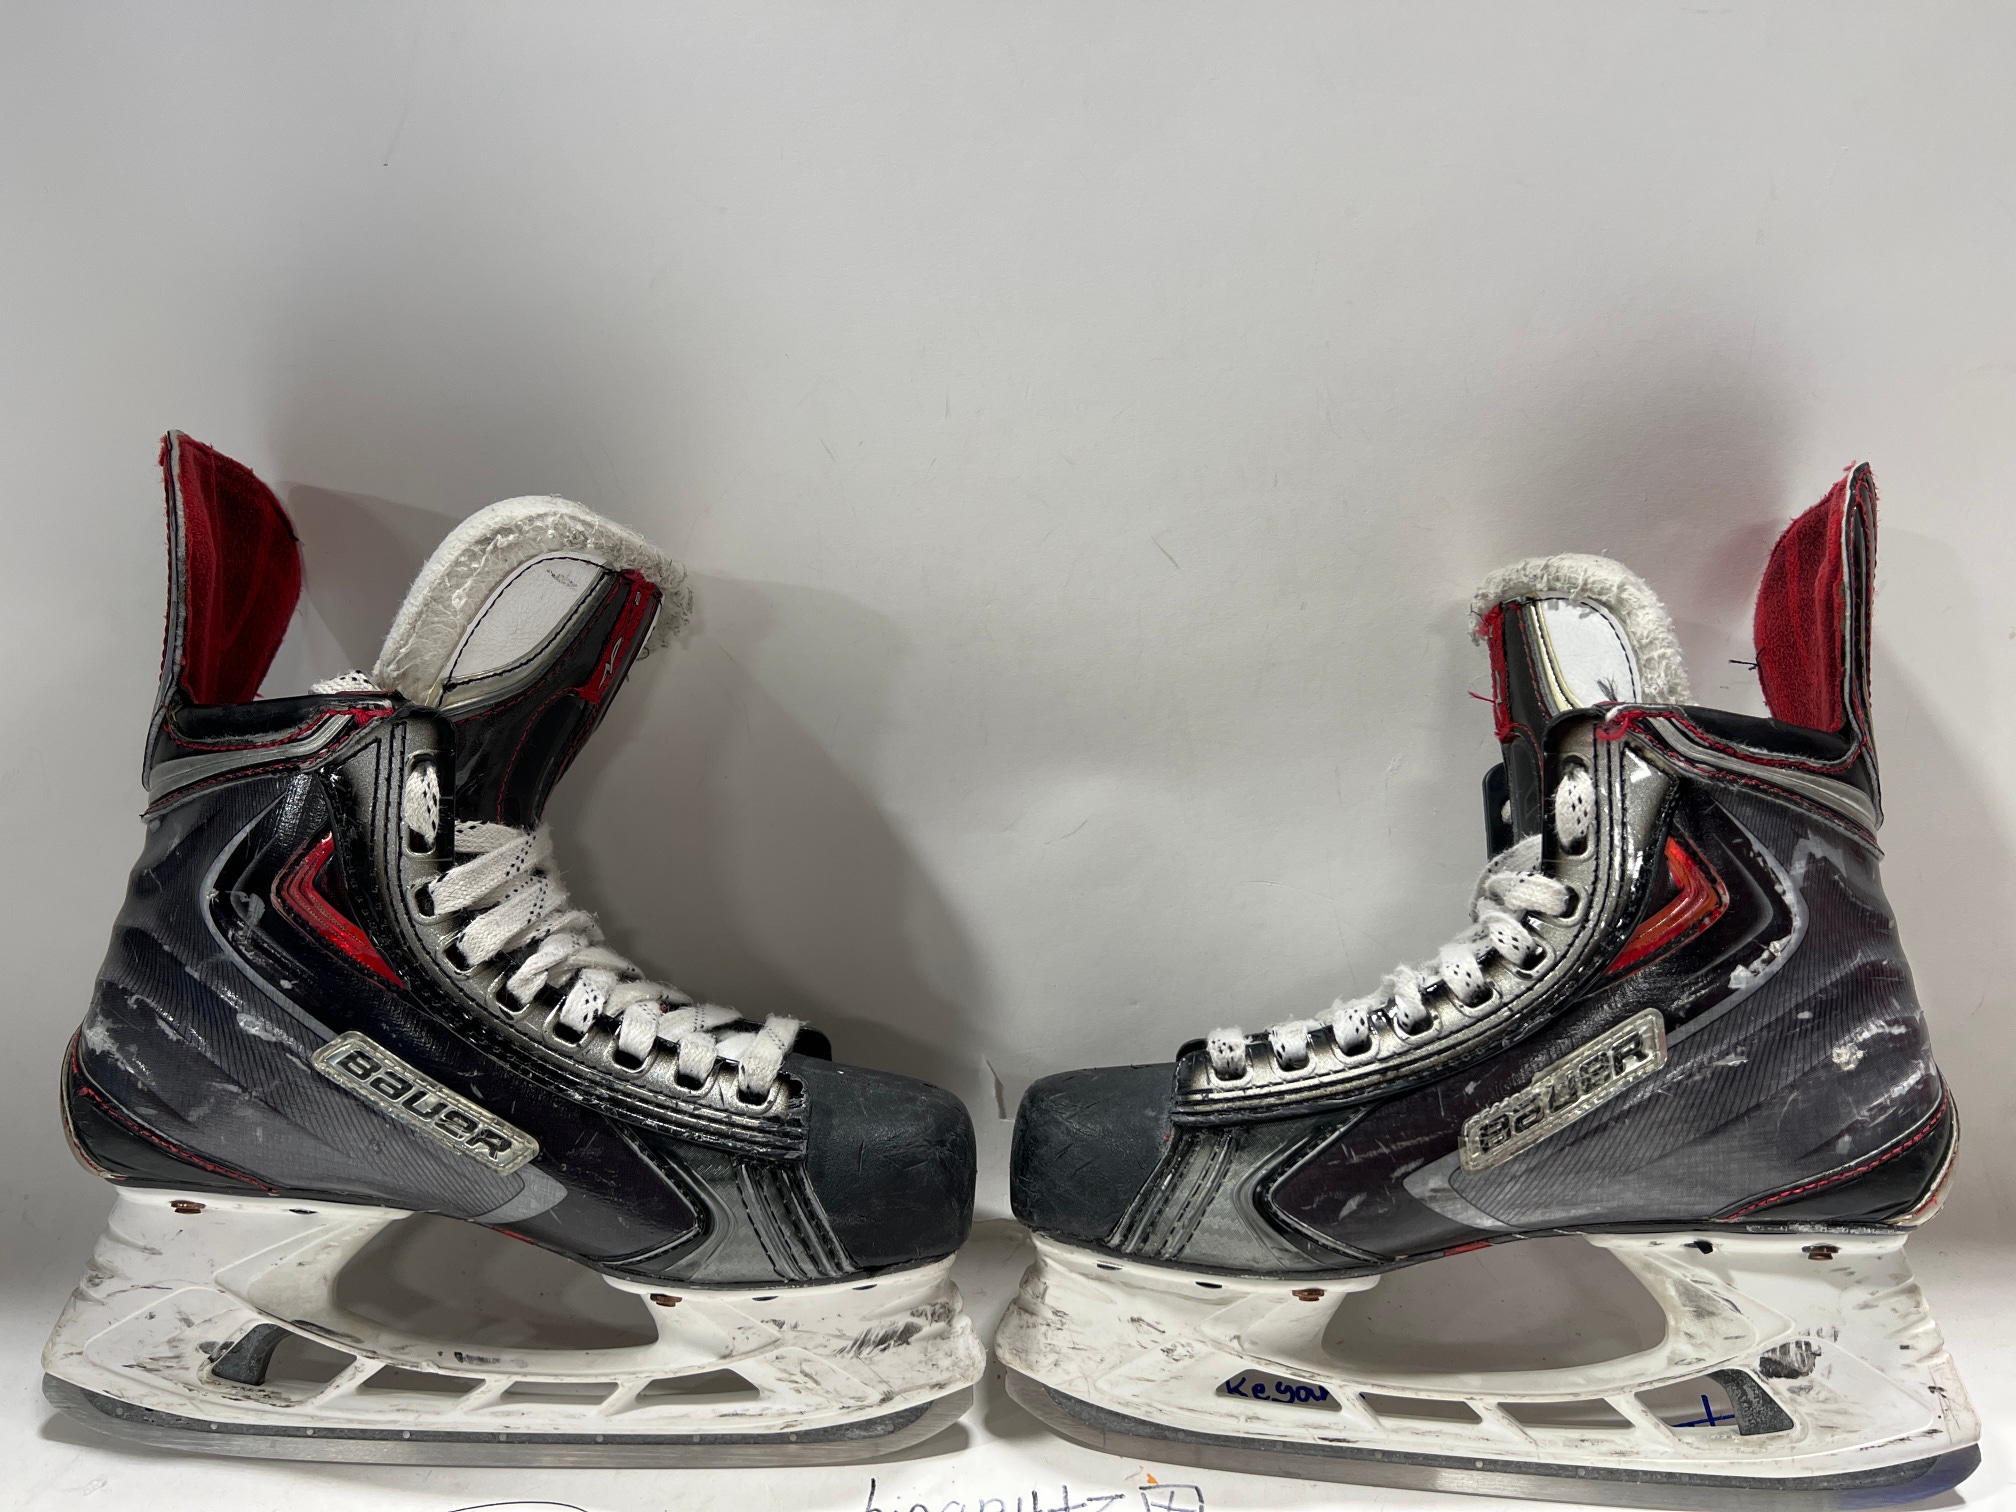 Bauer Vapor APX2 Hockey Skates | Used and New on SidelineSwap